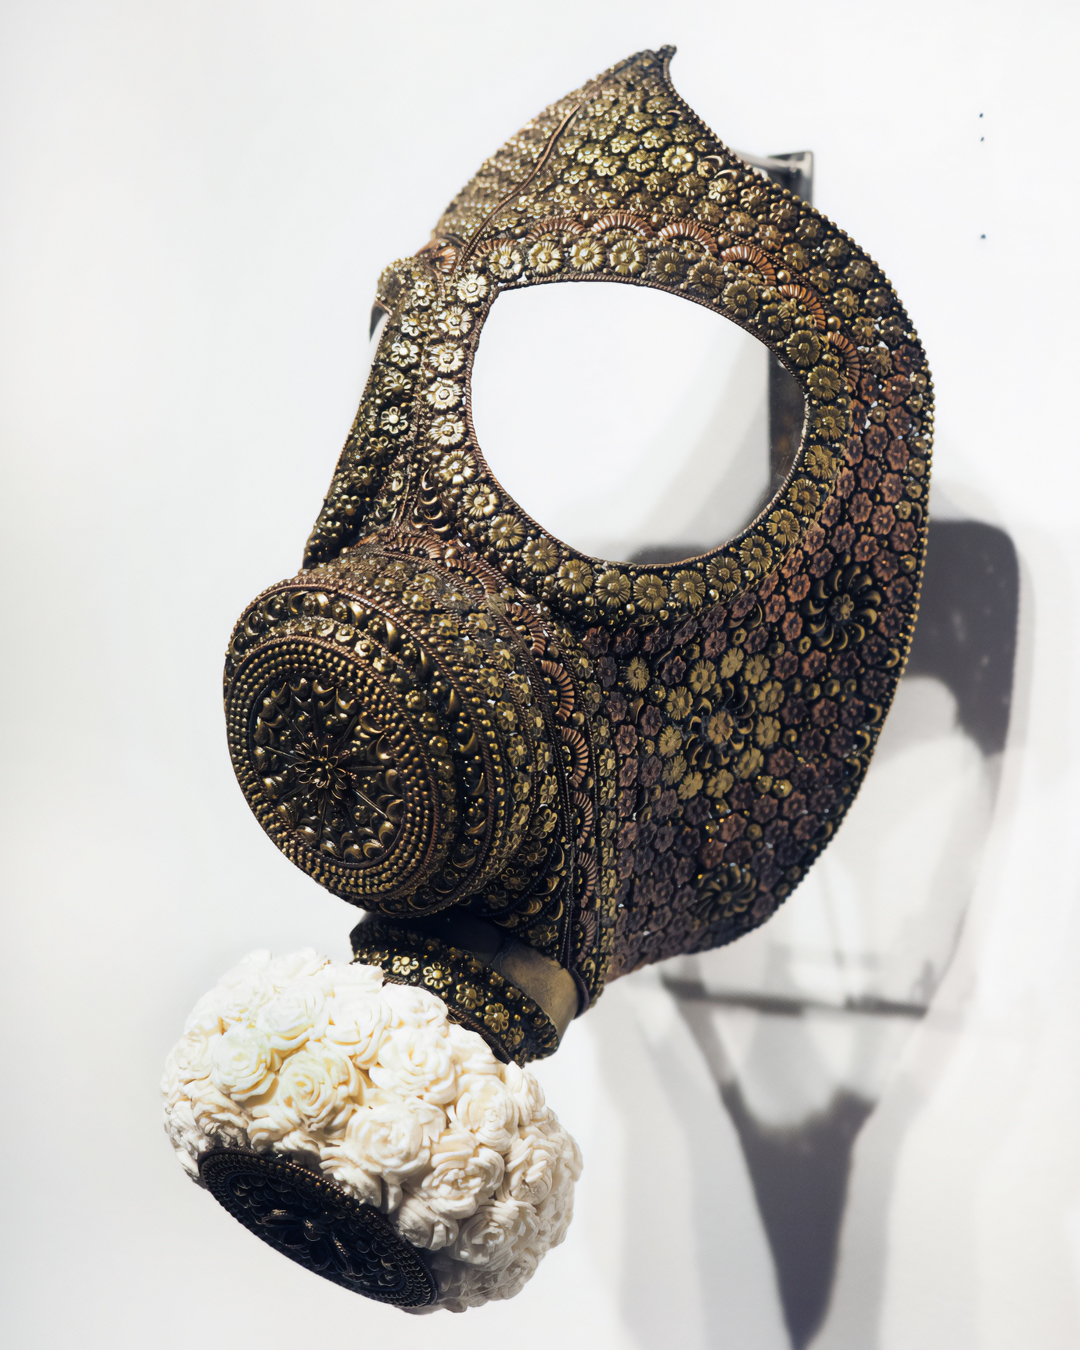 Promotesh Das Pulak. Gas Mask for the Rich and Famous, 2019. Shola flowers, resin and metal. Courtesy of Aicon Contemporary